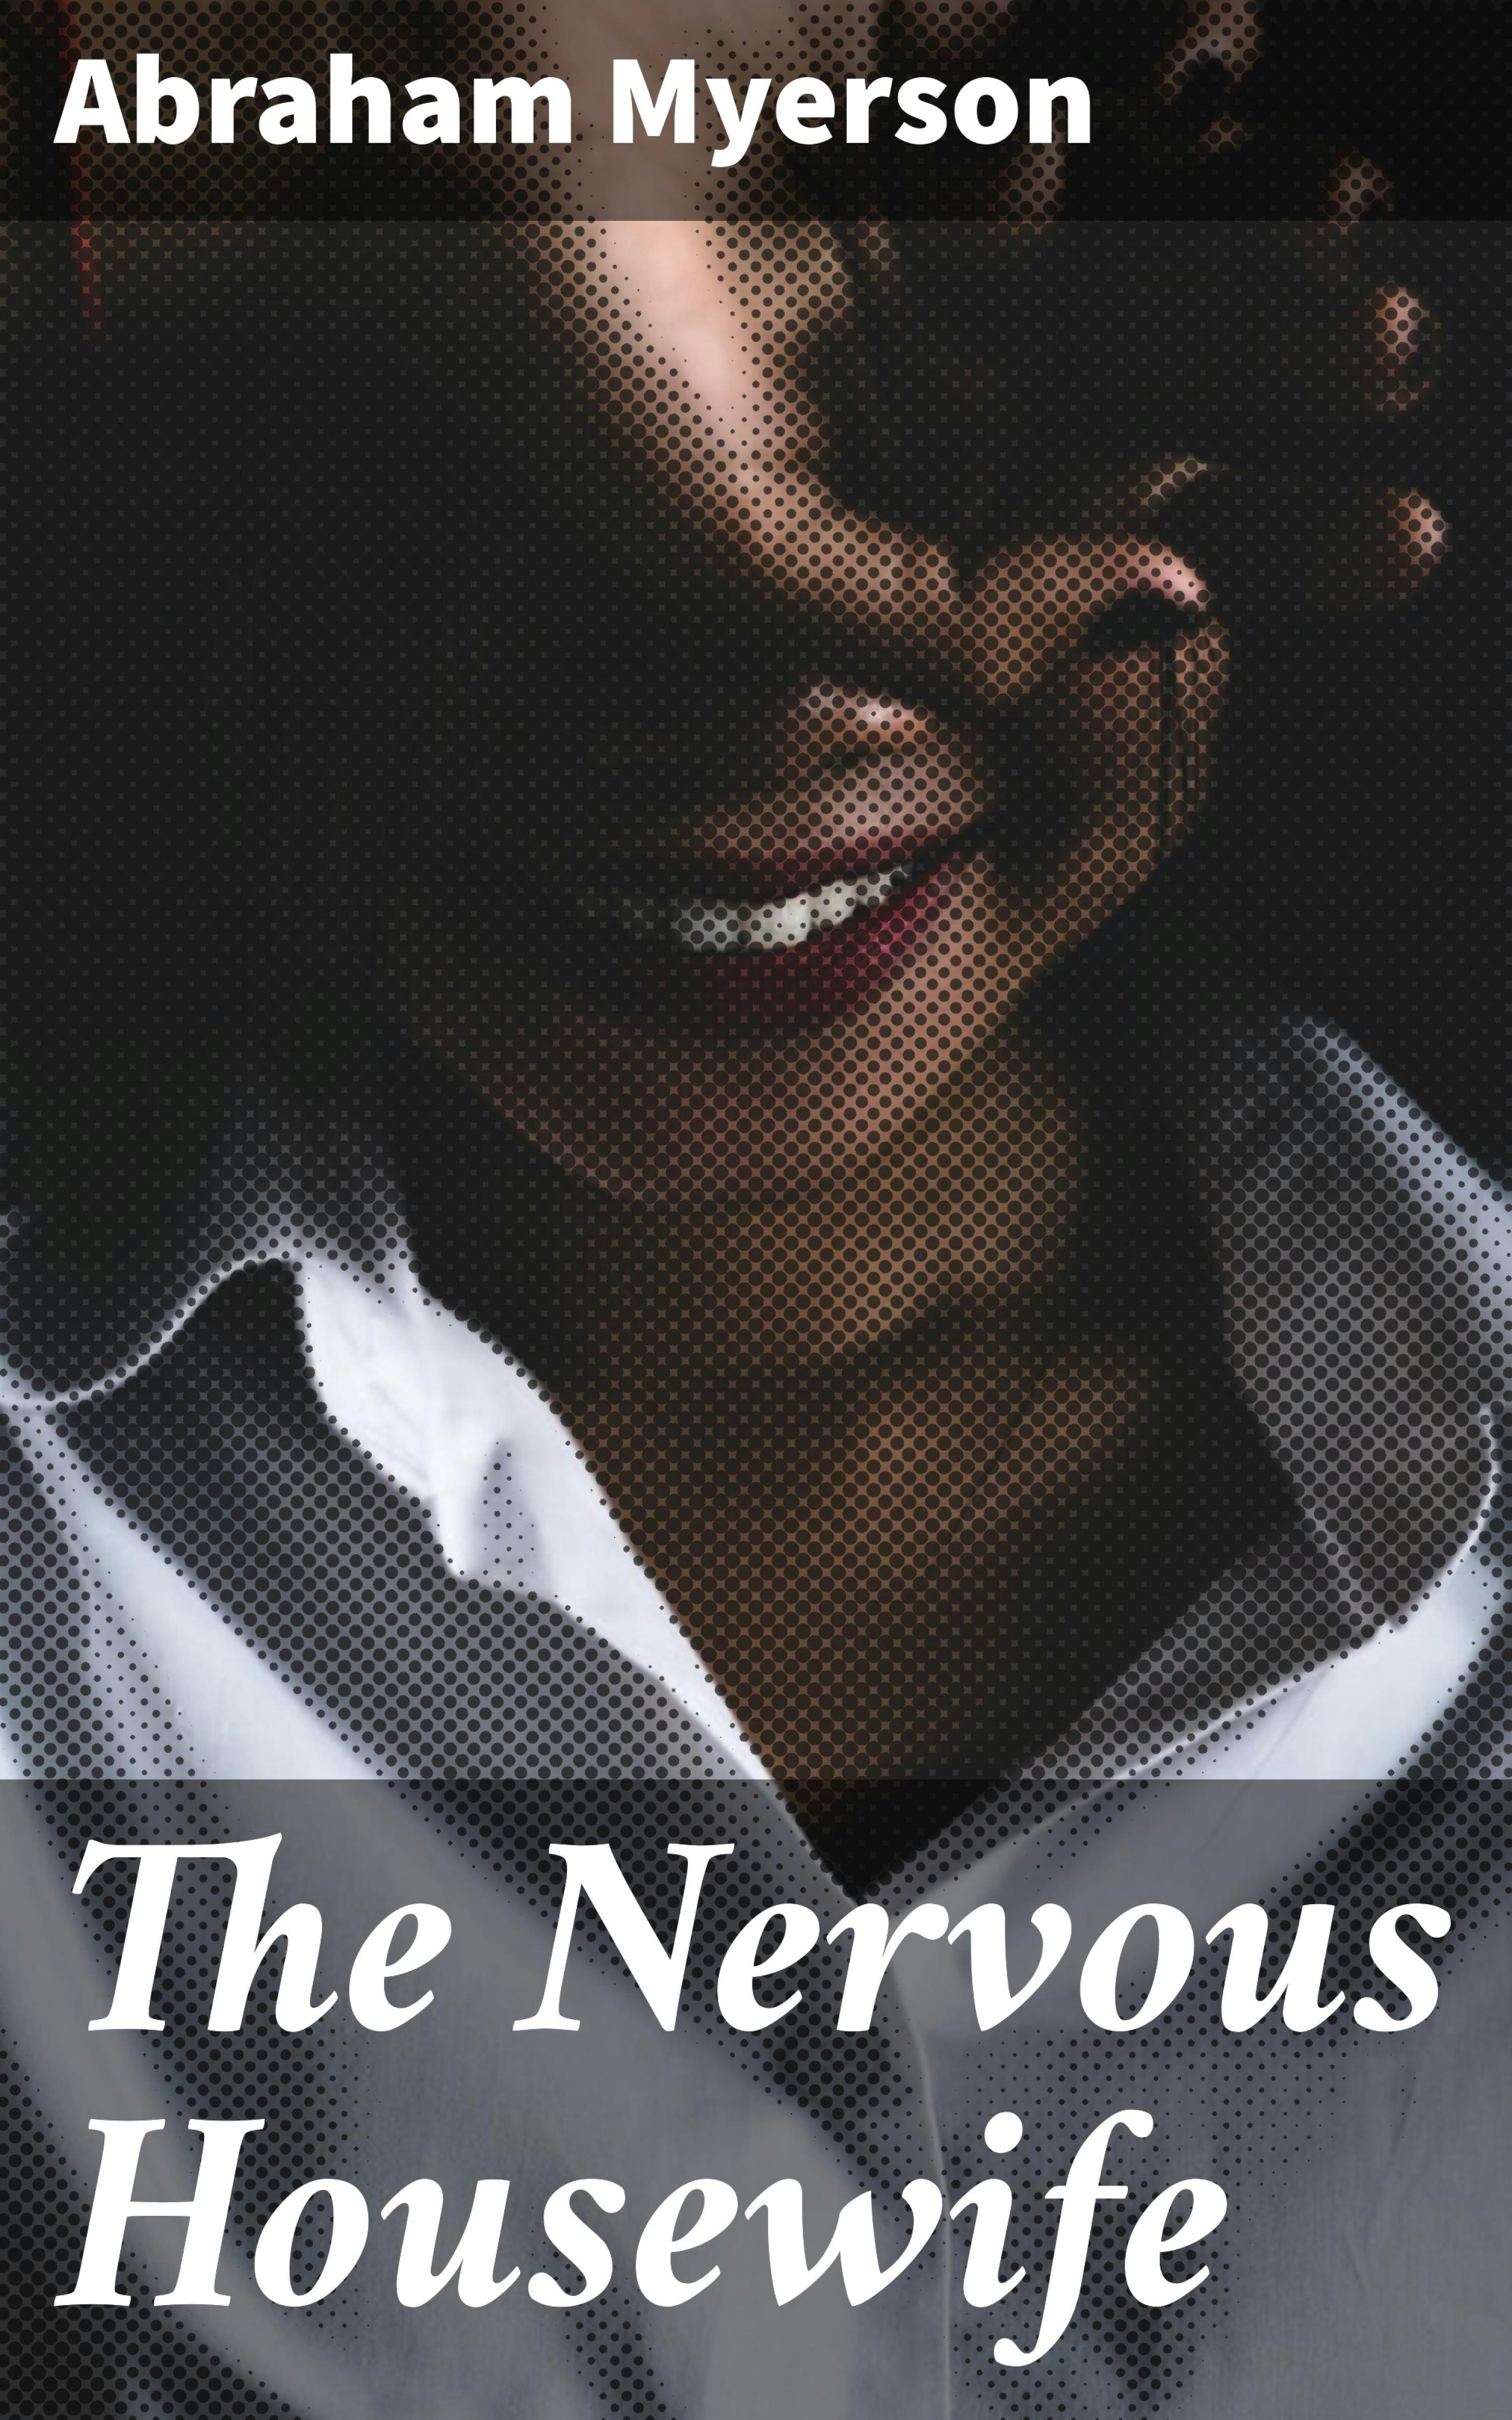 The Nervous Housewife - Abraham Myerson